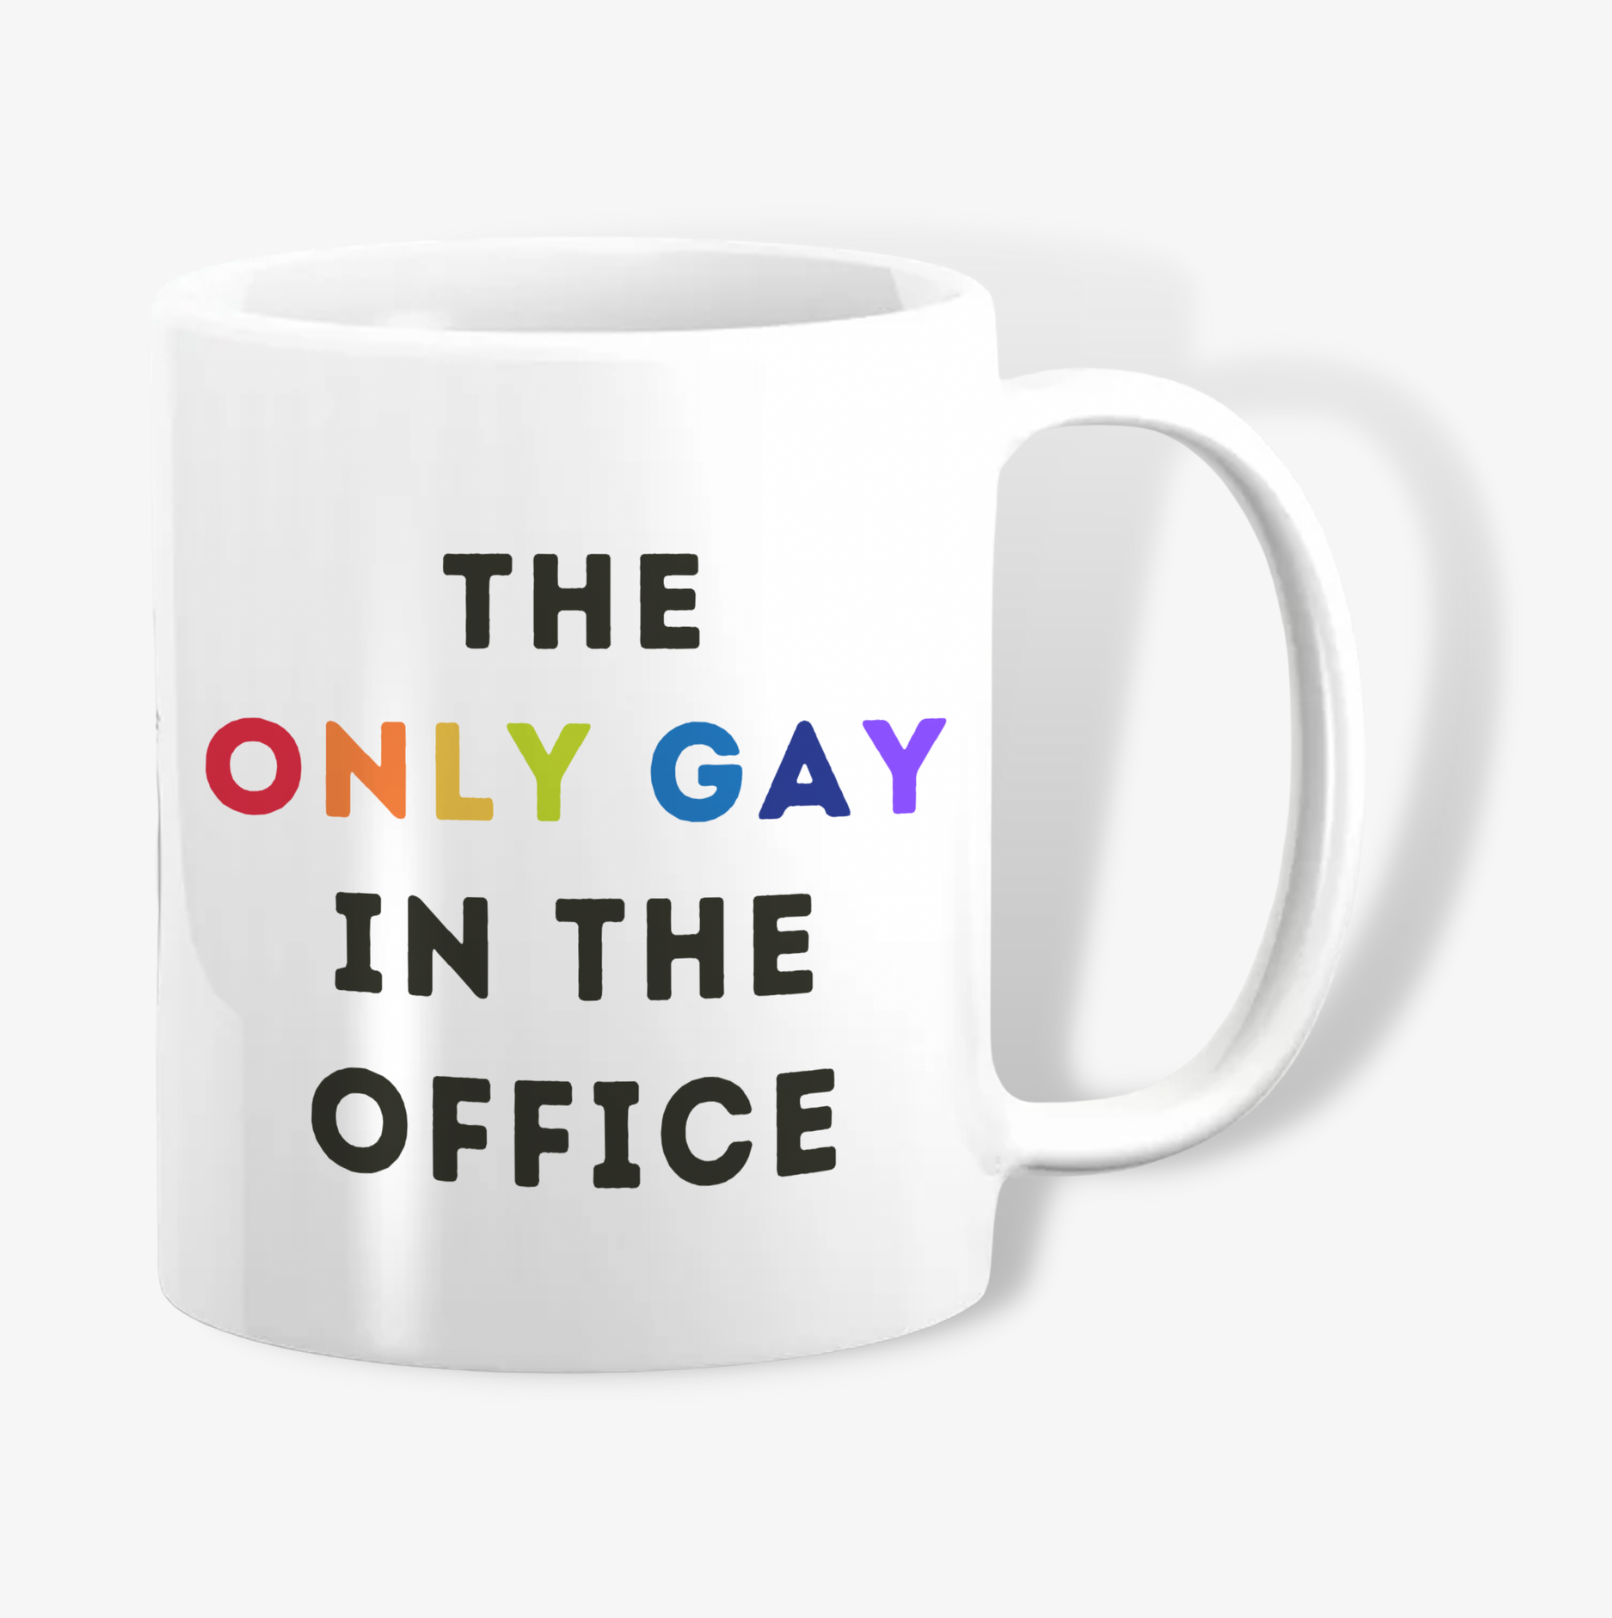 The Only Gay In The Office Mug